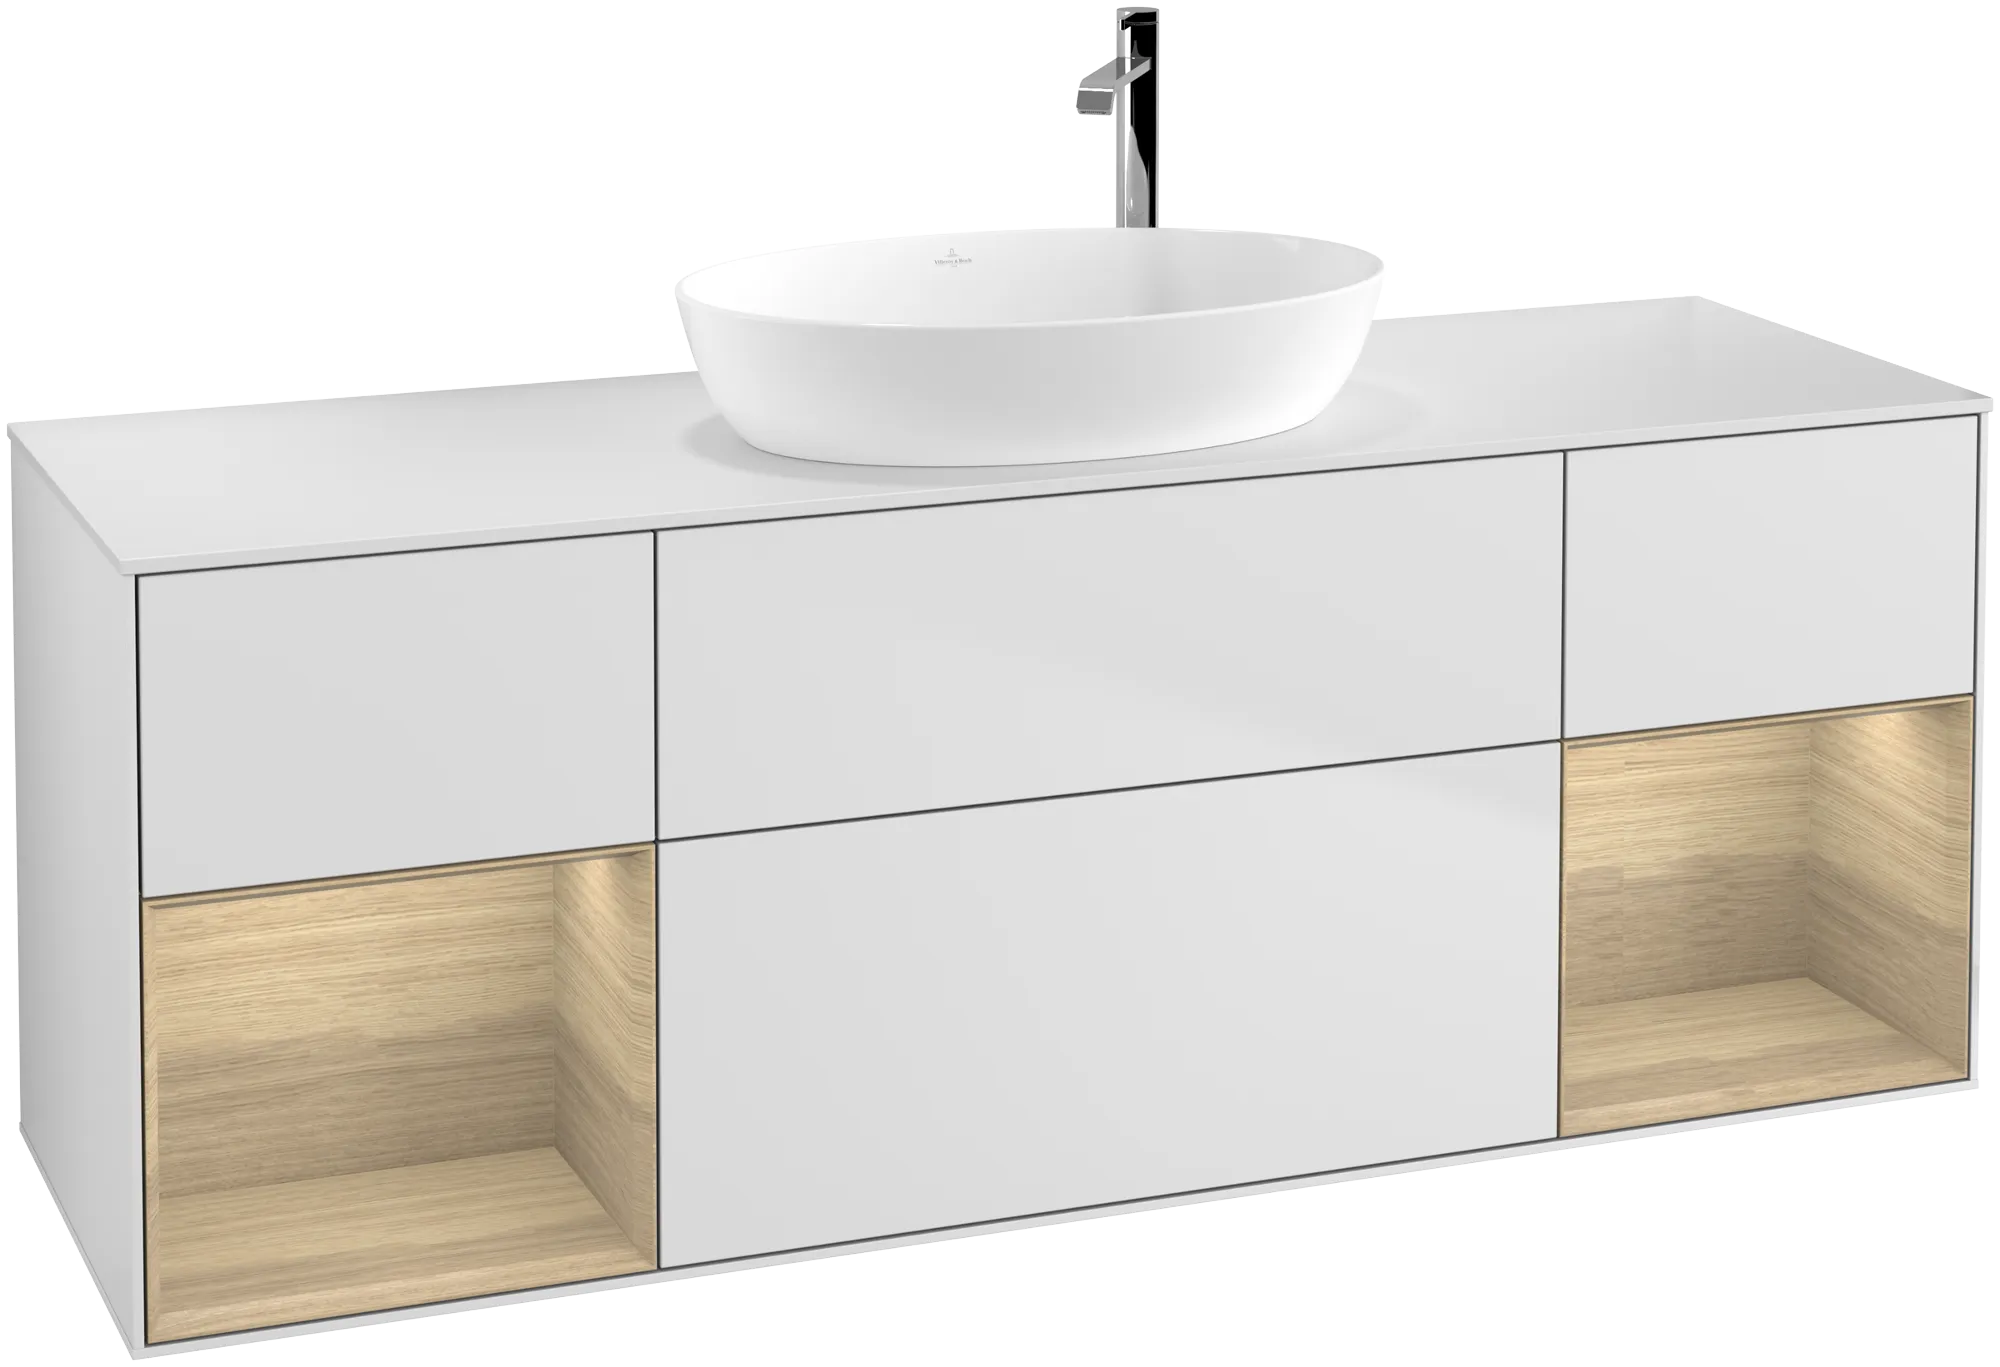 Picture of VILLEROY BOCH Finion Vanity unit, with lighting, 4 pull-out compartments, 1600 x 603 x 501 mm, White Matt Lacquer / Oak Veneer / Glass White Matt #G981PCMT